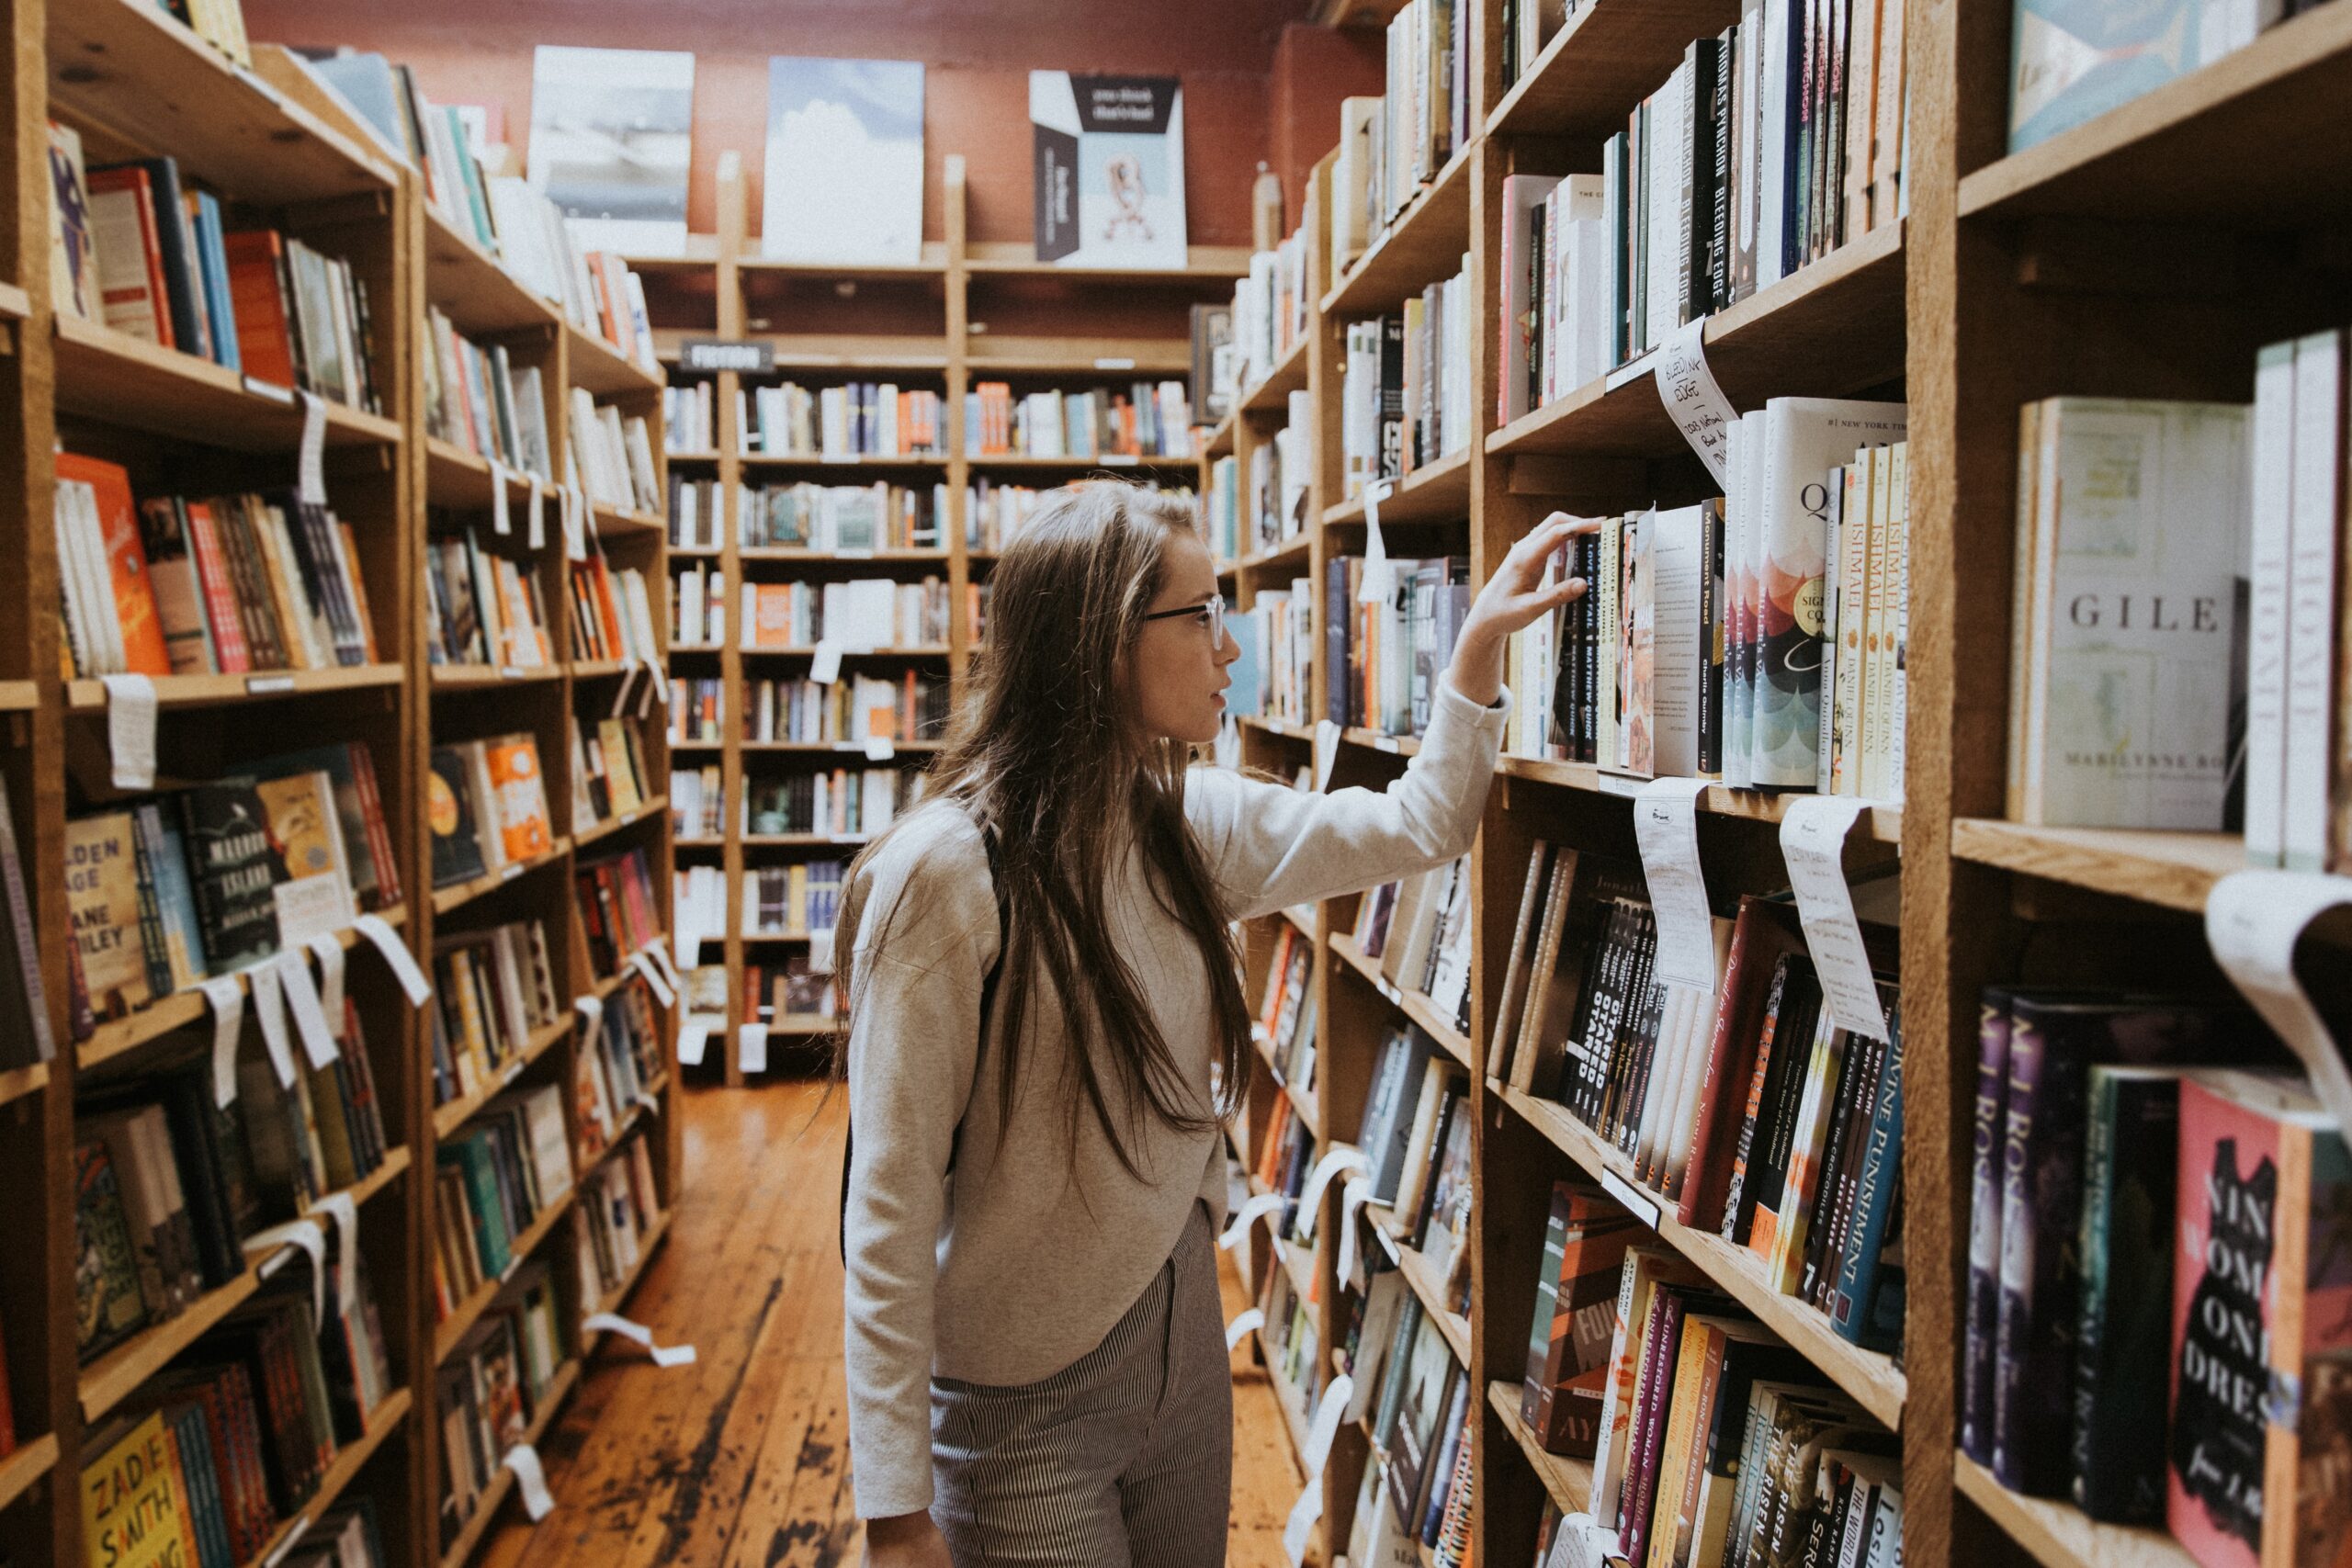 5 Tips for Finding Your Next Great Book